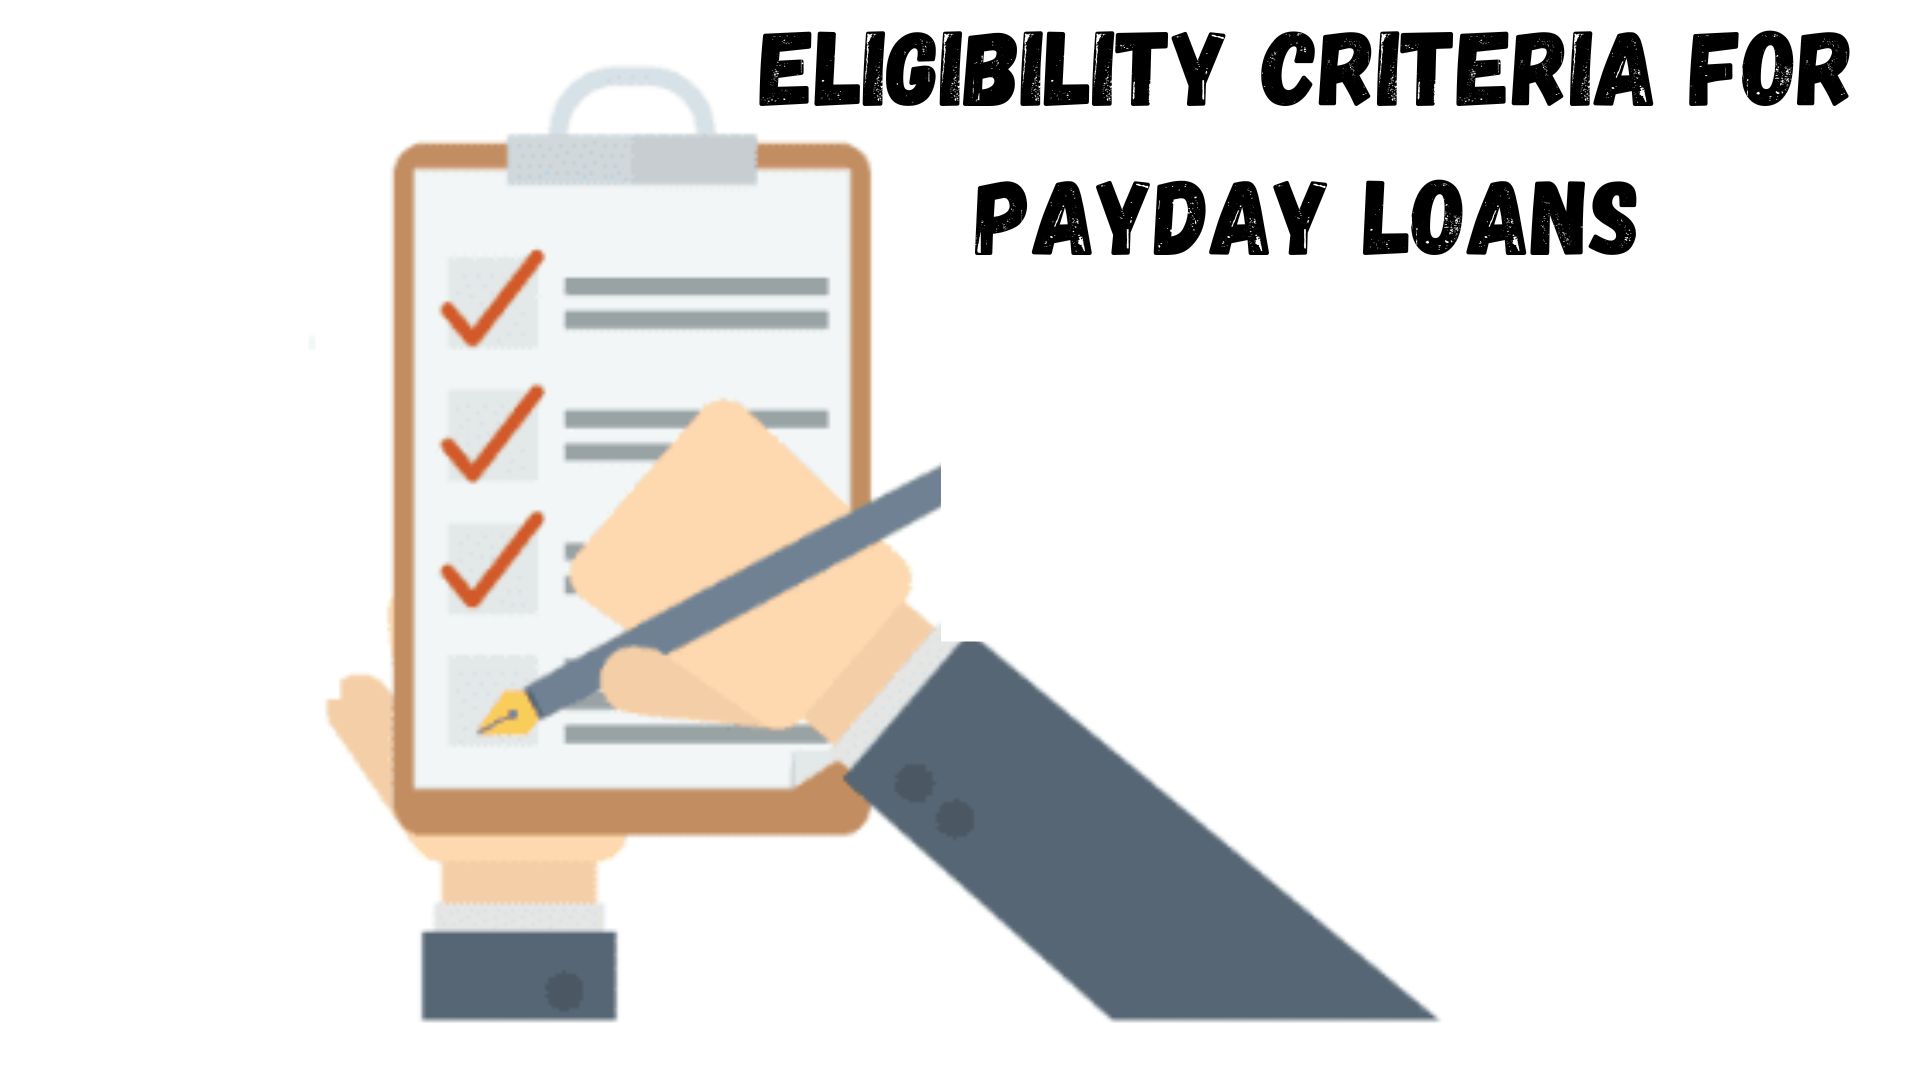 Eligibility Criteria for Payday Loans.